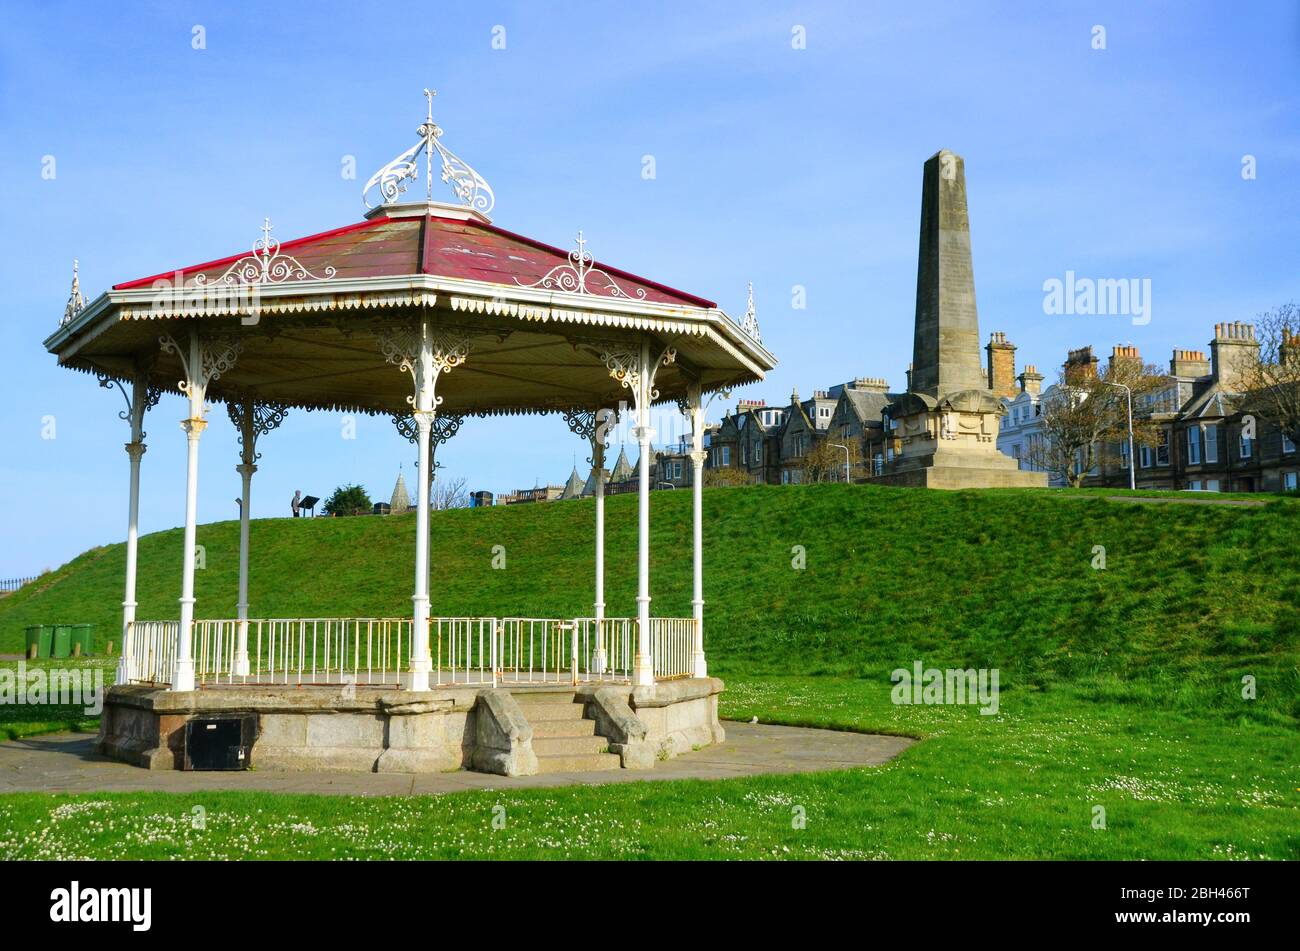 The old red roofed bandstand at St. Andrews with the martyrs monument behind. Stock Photo